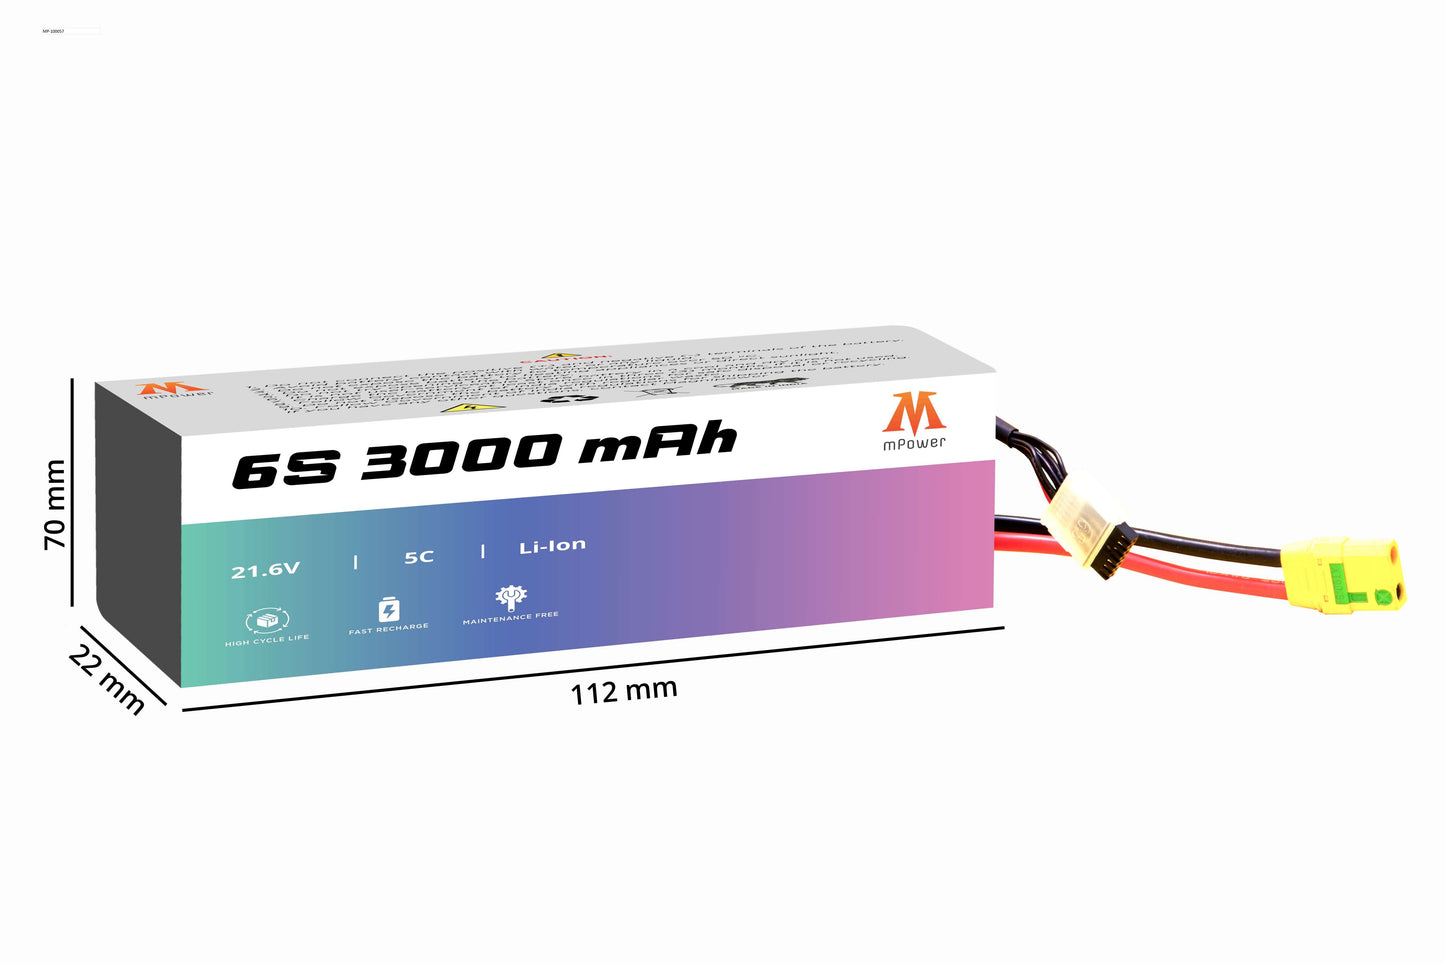 mPower 6S 3000mAh Lithium-Ion Battery for Surveillance Drones